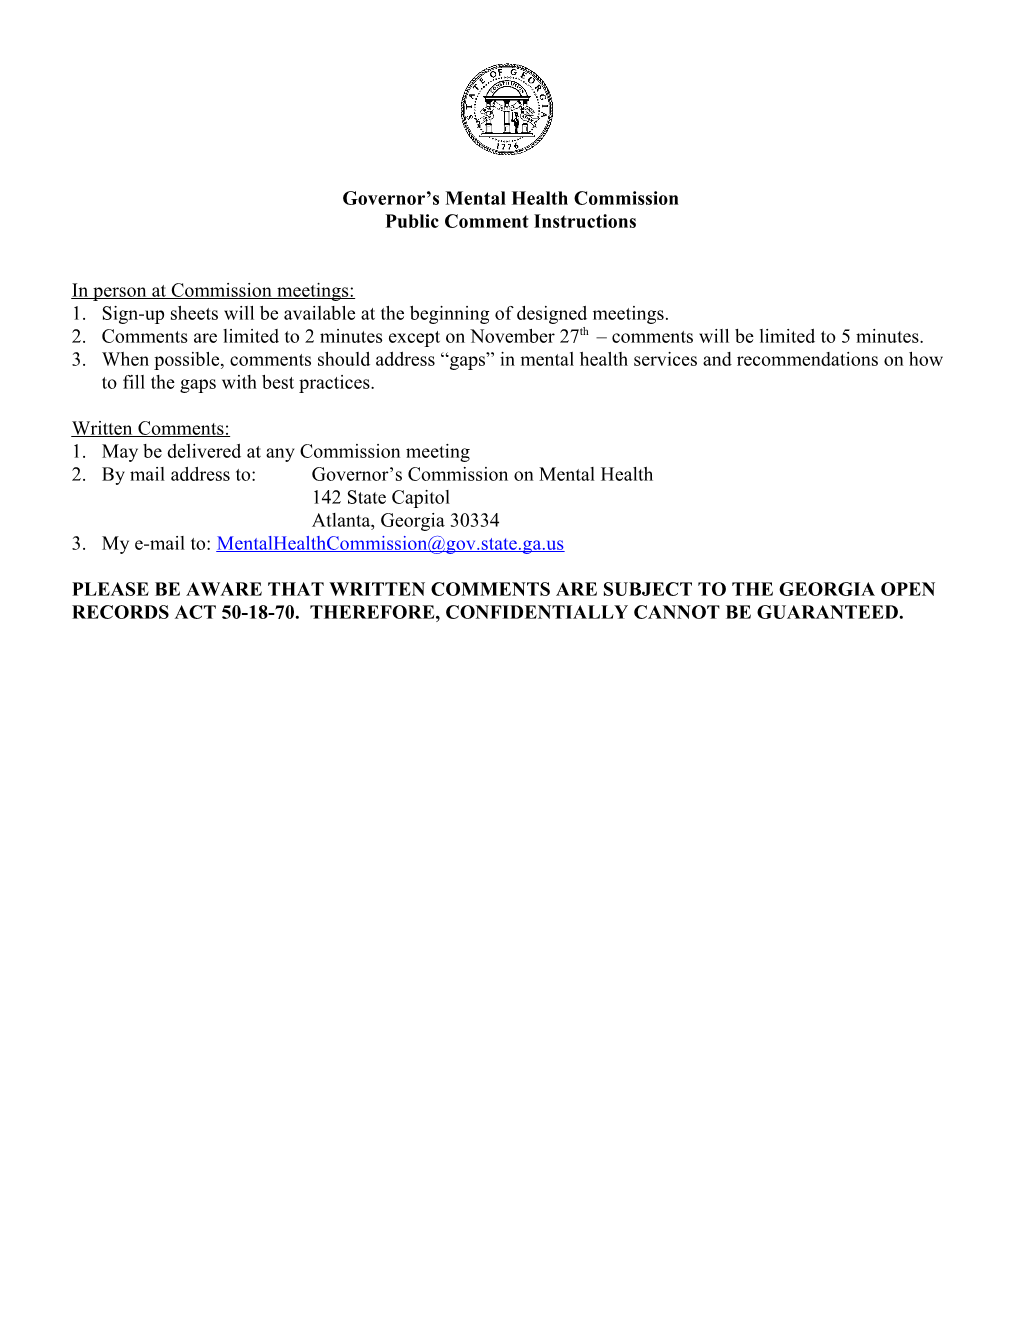 Mental Health Commission Meeting Schedule